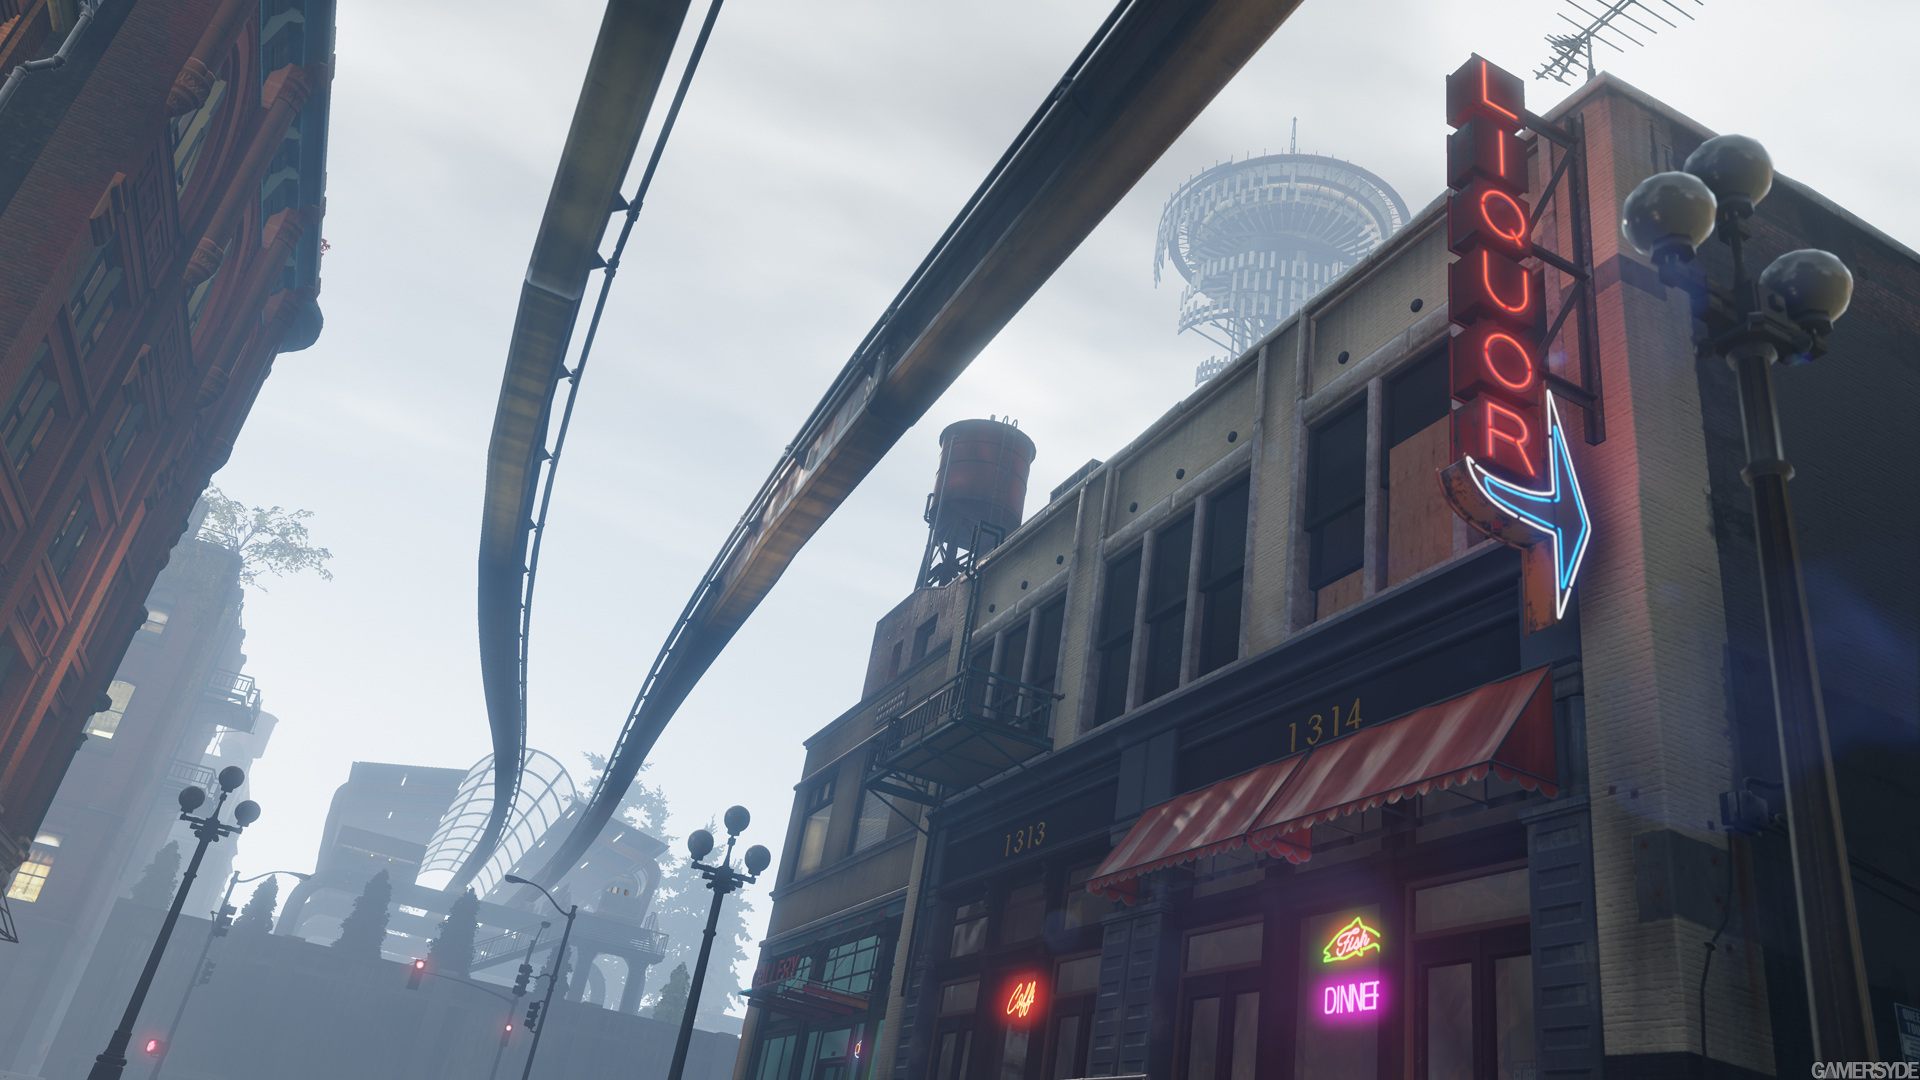 image_infamous_second_son-22604-2661_0004.jpg